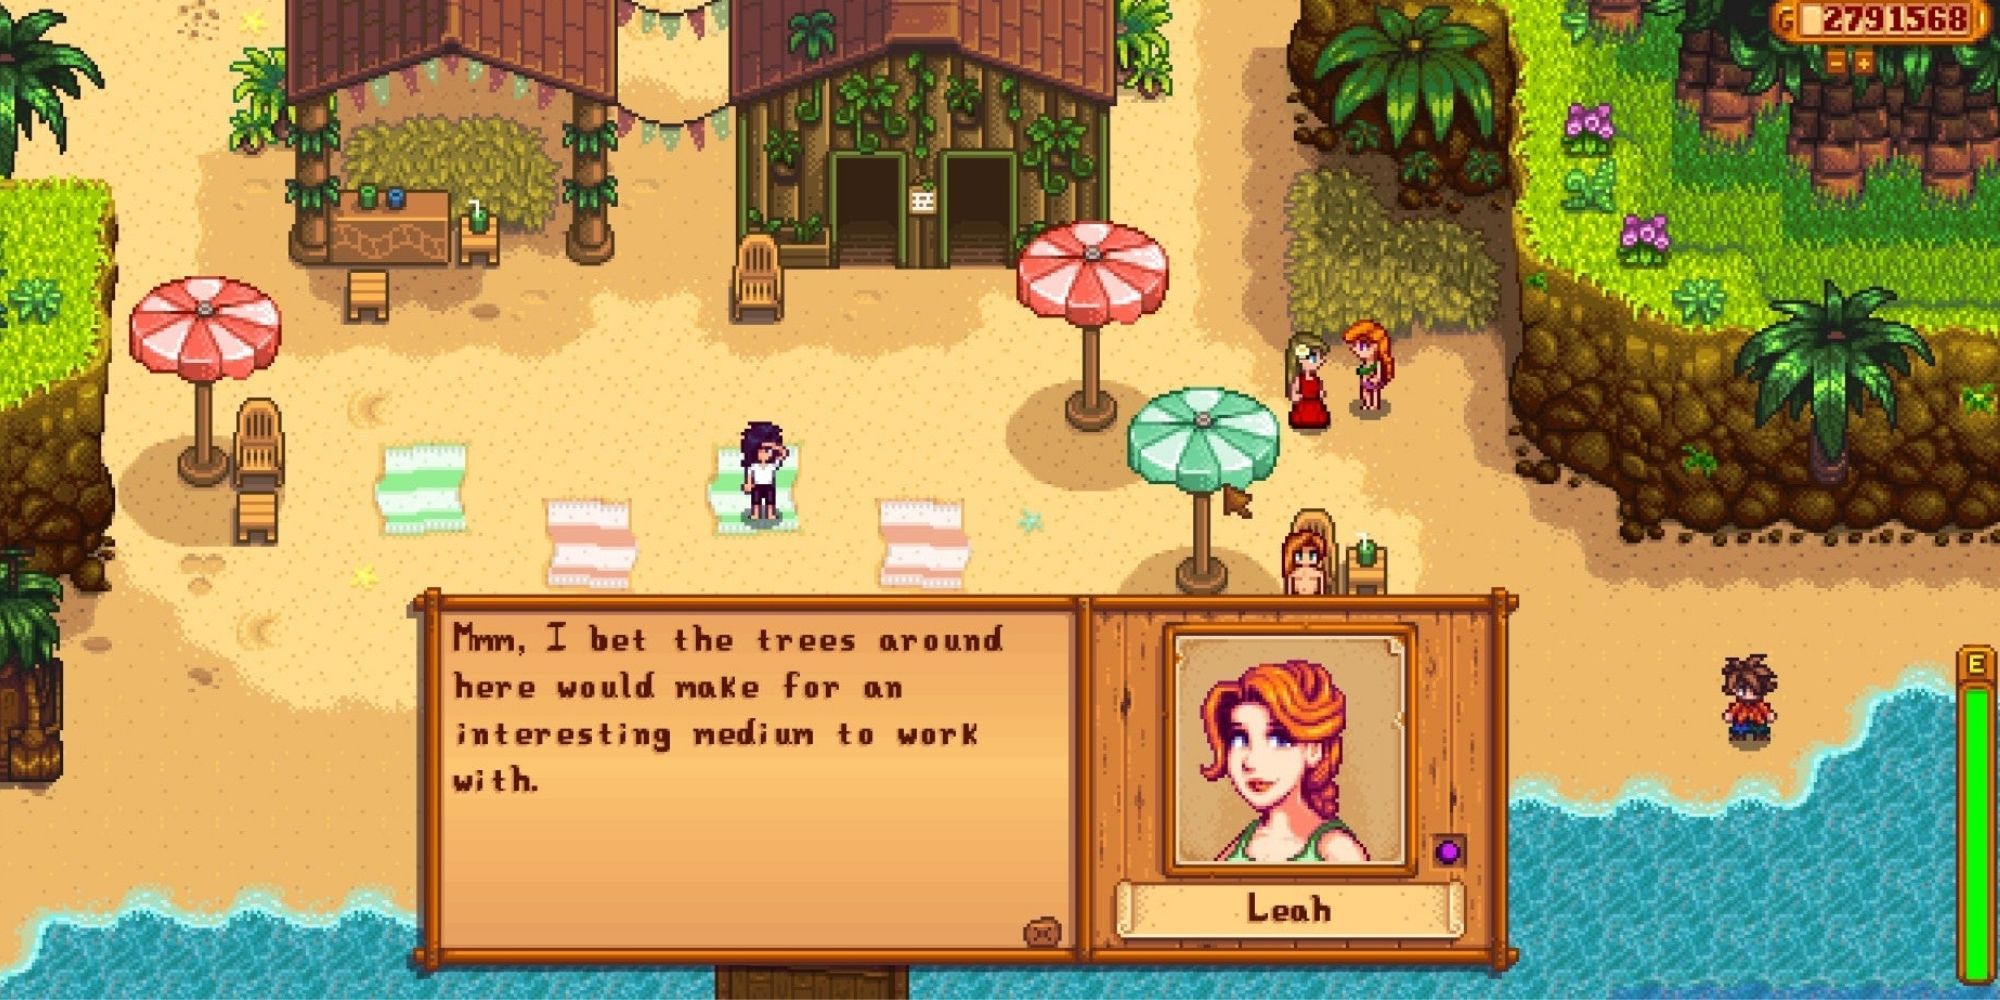 Stardew Valley - Talking to Leah on Ginger Island Resort